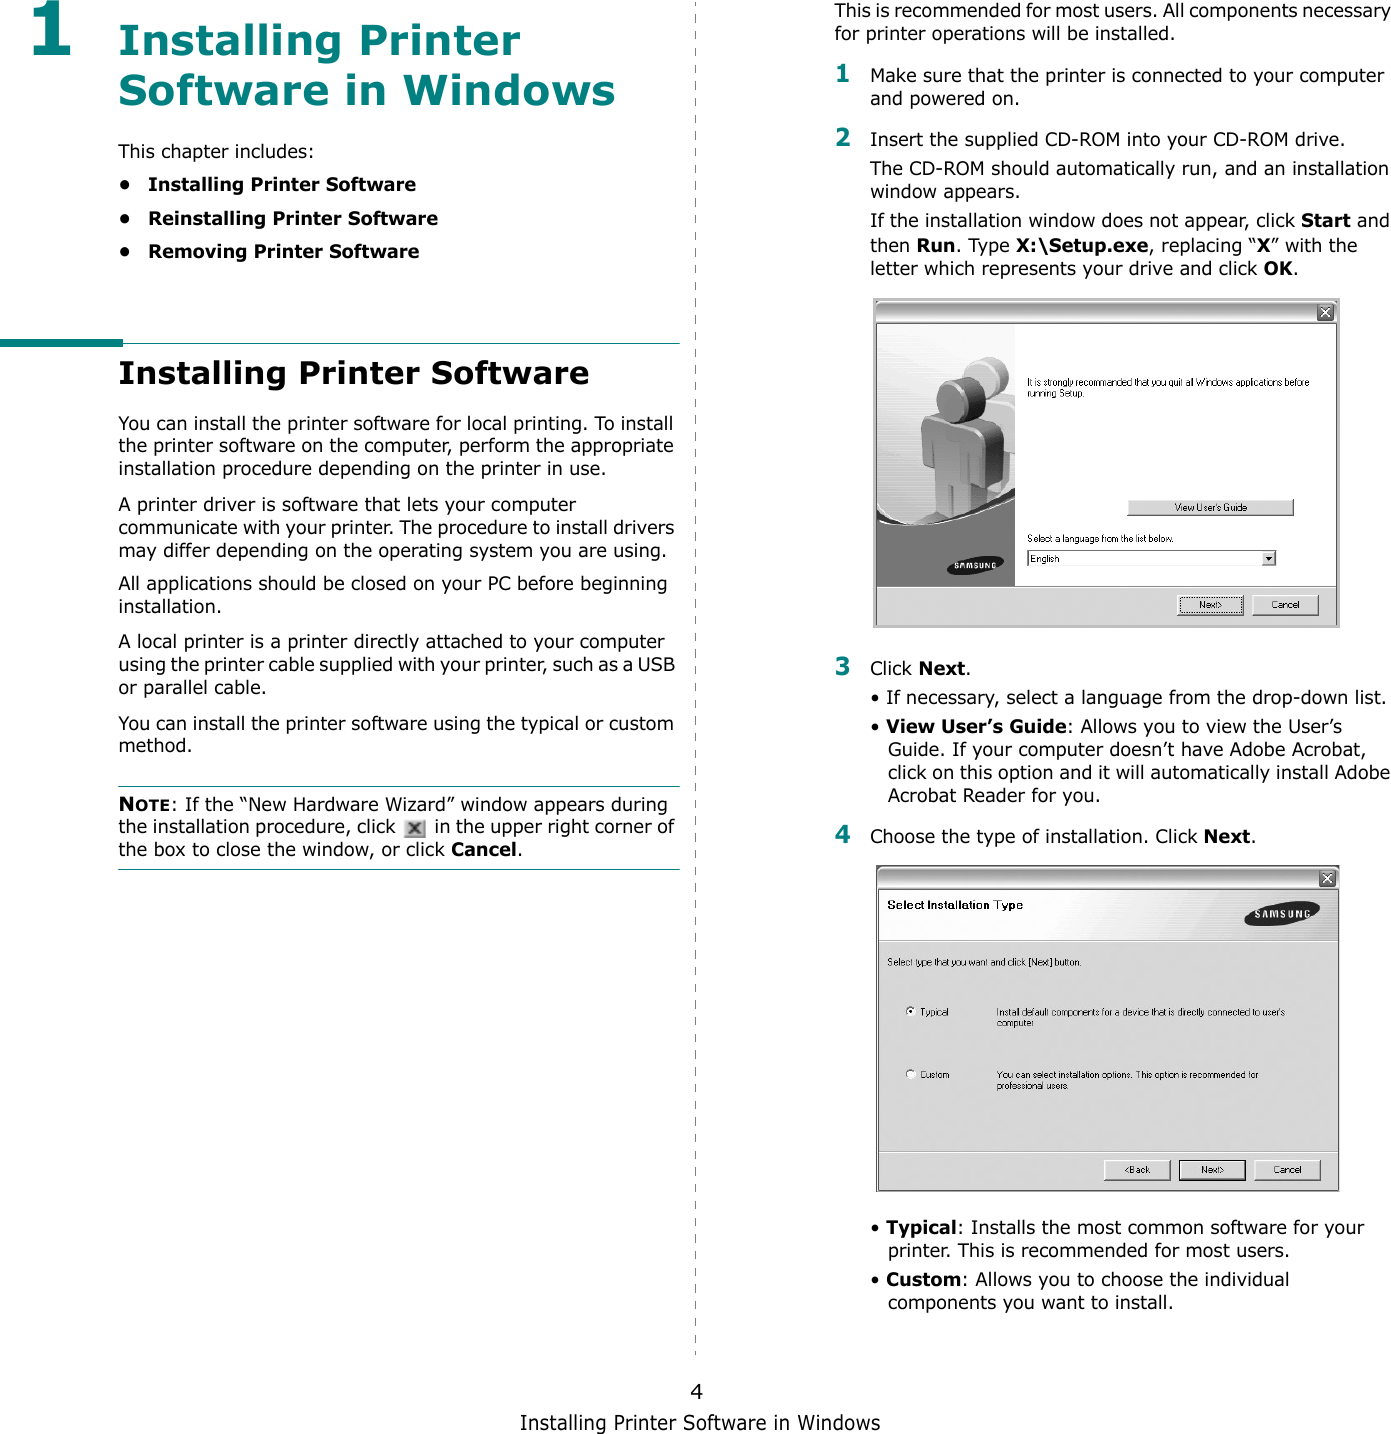 Installing Printer Software in Windows41Installing Printer Software in WindowsThis chapter includes:• Installing Printer Software• Reinstalling Printer Software• Removing Printer SoftwareInstalling Printer SoftwareYou can install the printer software for local printing. To install the printer software on the computer, perform the appropriate installation procedure depending on the printer in use.A printer driver is software that lets your computer communicate with your printer. The procedure to install drivers may differ depending on the operating system you are using.All applications should be closed on your PC before beginning installation. A local printer is a printer directly attached to your computer using the printer cable supplied with your printer, such as a USB or parallel cable.You can install the printer software using the typical or custom method.NOTE: If the “New Hardware Wizard” window appears during the installation procedure, click   in the upper right corner of the box to close the window, or click Cancel.This is recommended for most users. All components necessary for printer operations will be installed.1Make sure that the printer is connected to your computer and powered on.2Insert the supplied CD-ROM into your CD-ROM drive.The CD-ROM should automatically run, and an installation window appears.If the installation window does not appear, click Start and then Run. Type X:\Setup.exe, replacing “X” with the letter which represents your drive and click OK.3Click Next. • If necessary, select a language from the drop-down list.• View User’s Guide: Allows you to view the User’s Guide. If your computer doesn’t have Adobe Acrobat, click on this option and it will automatically install Adobe Acrobat Reader for you.4Choose the type of installation. Click Next. • Typical: Installs the most common software for your printer. This is recommended for most users.• Custom: Allows you to choose the individual components you want to install.